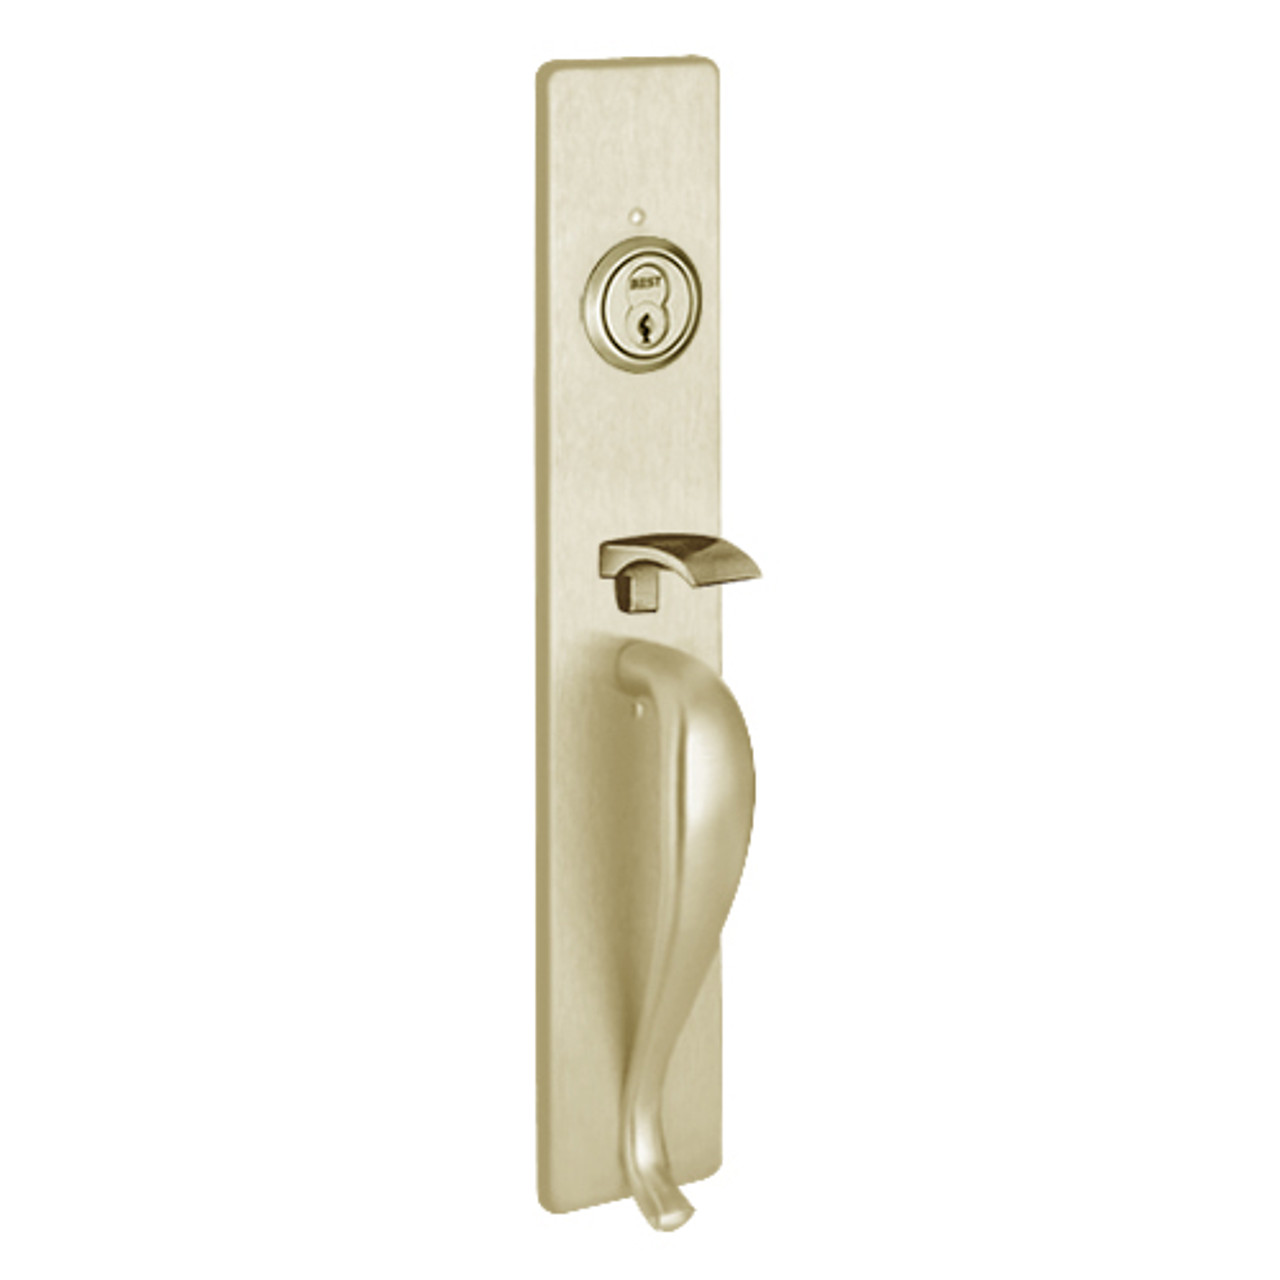 RM1705B-606 PHI Key Controls Thumb Piece Retrofit Trim with B Design Pull for Apex and Olympian Series Exit Device in Satin Brass Finish